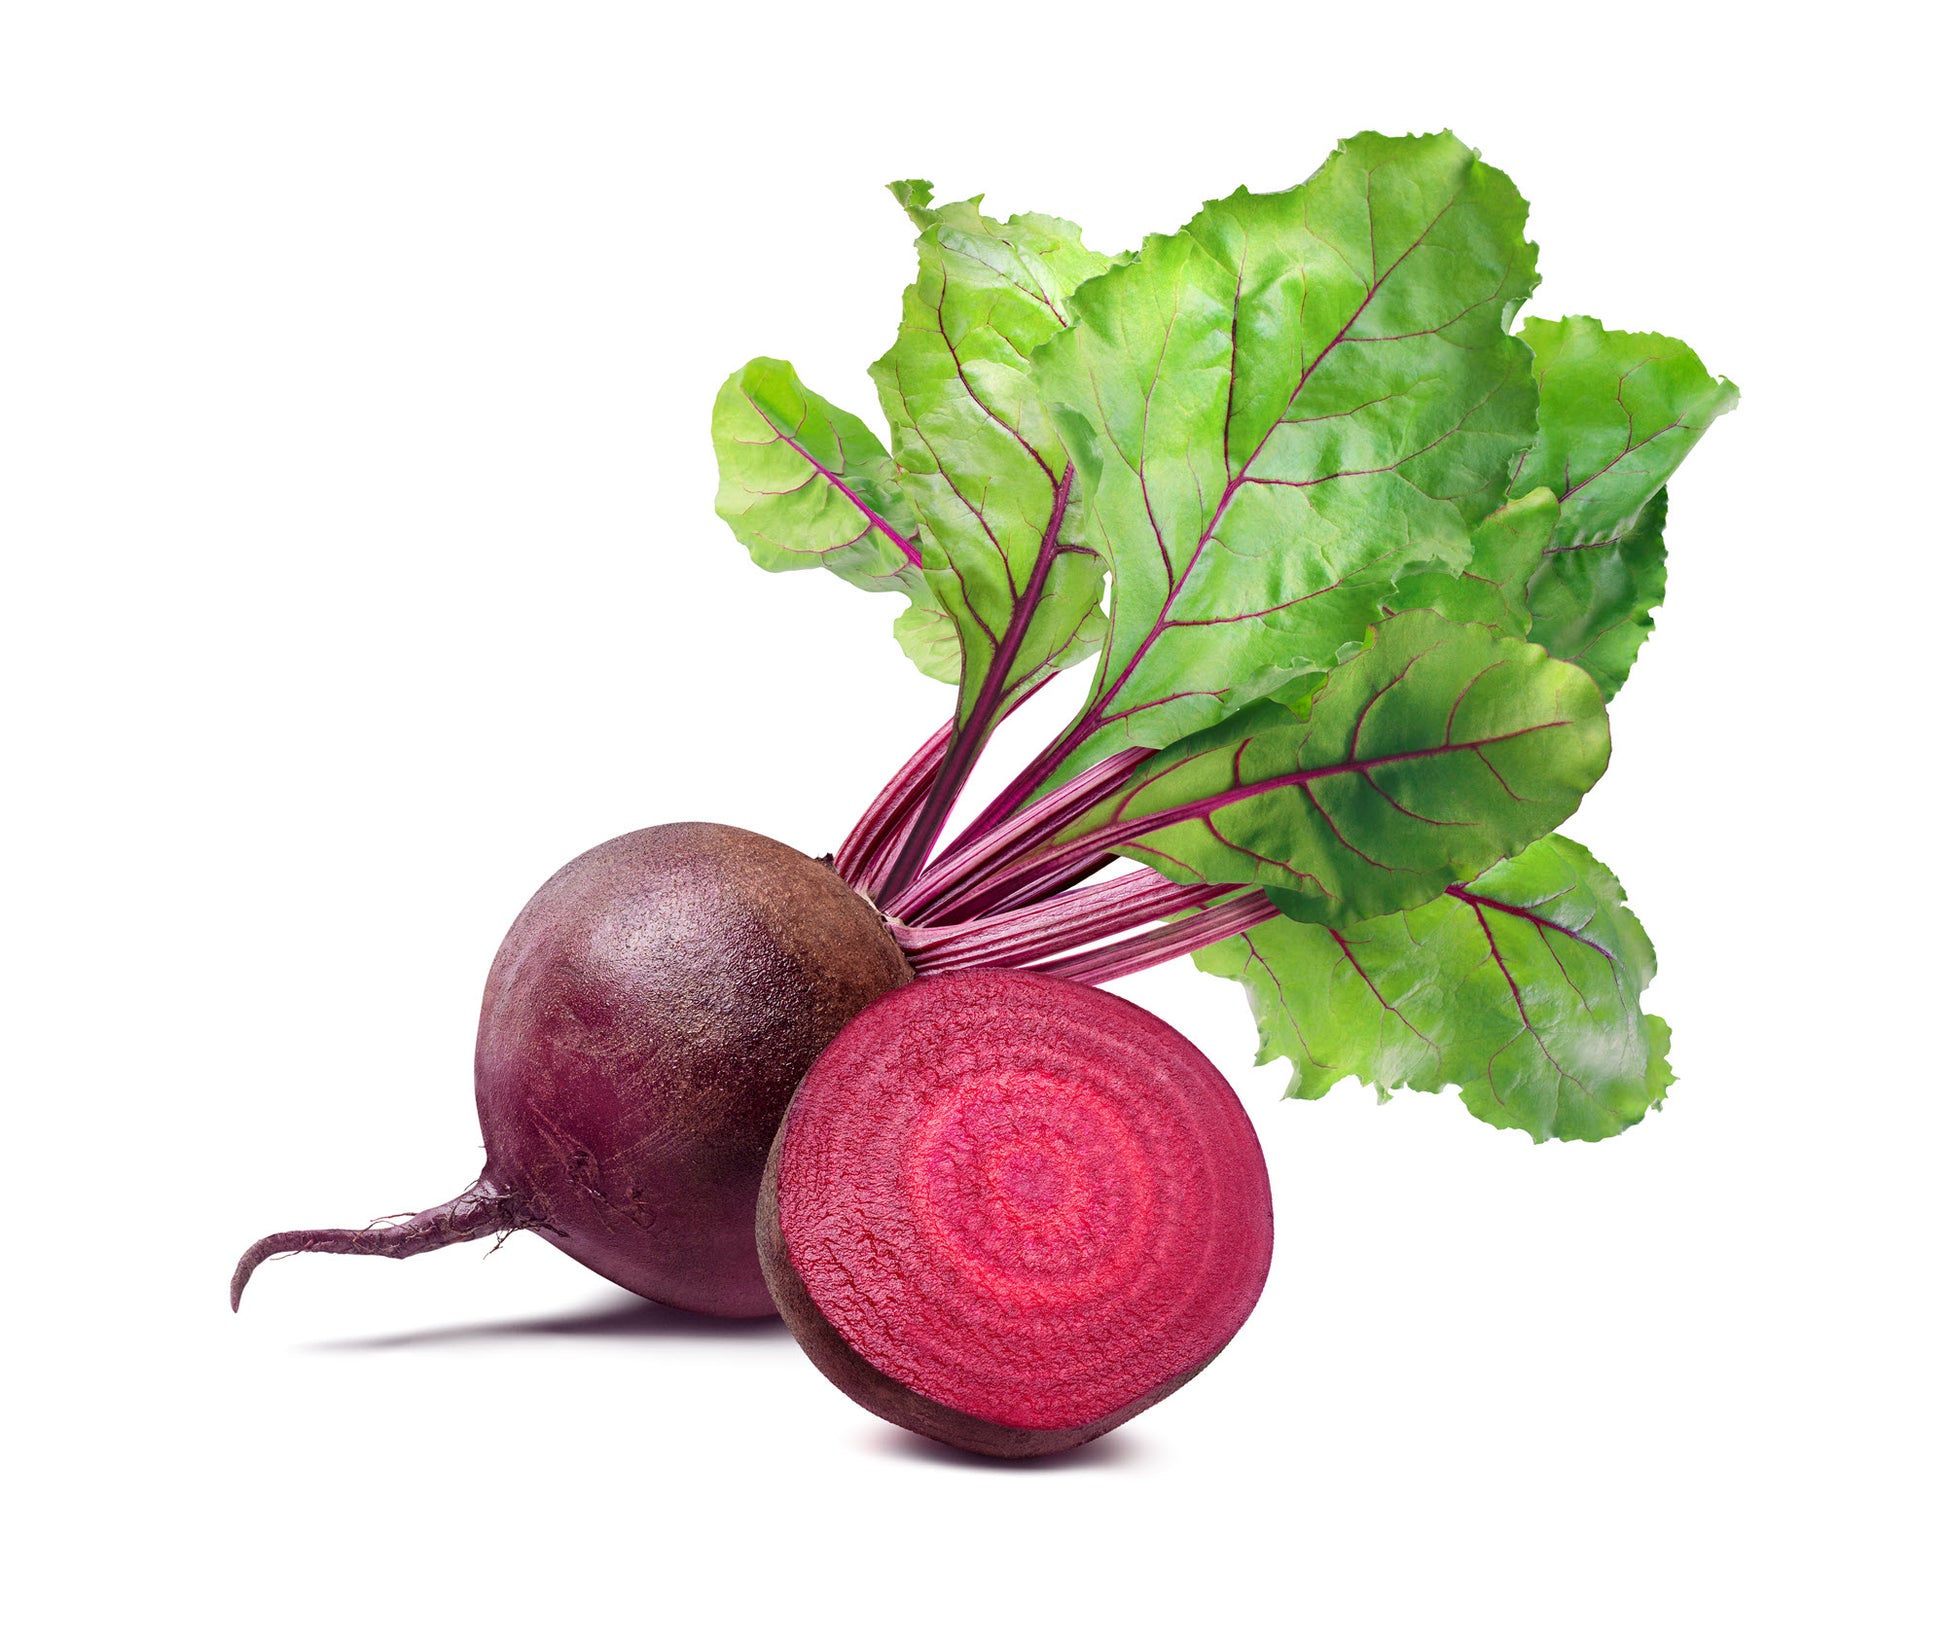 On display are 2 beets, of the variety Detroit Dark Red, laying on a white surface, surrounded with a white background.  One beet is partially in front of the other beet.  The beet in front is cut in half, displaying the red juiciness of the beet flesh. The beet in the back is intact, with the stem and leaves also intact.